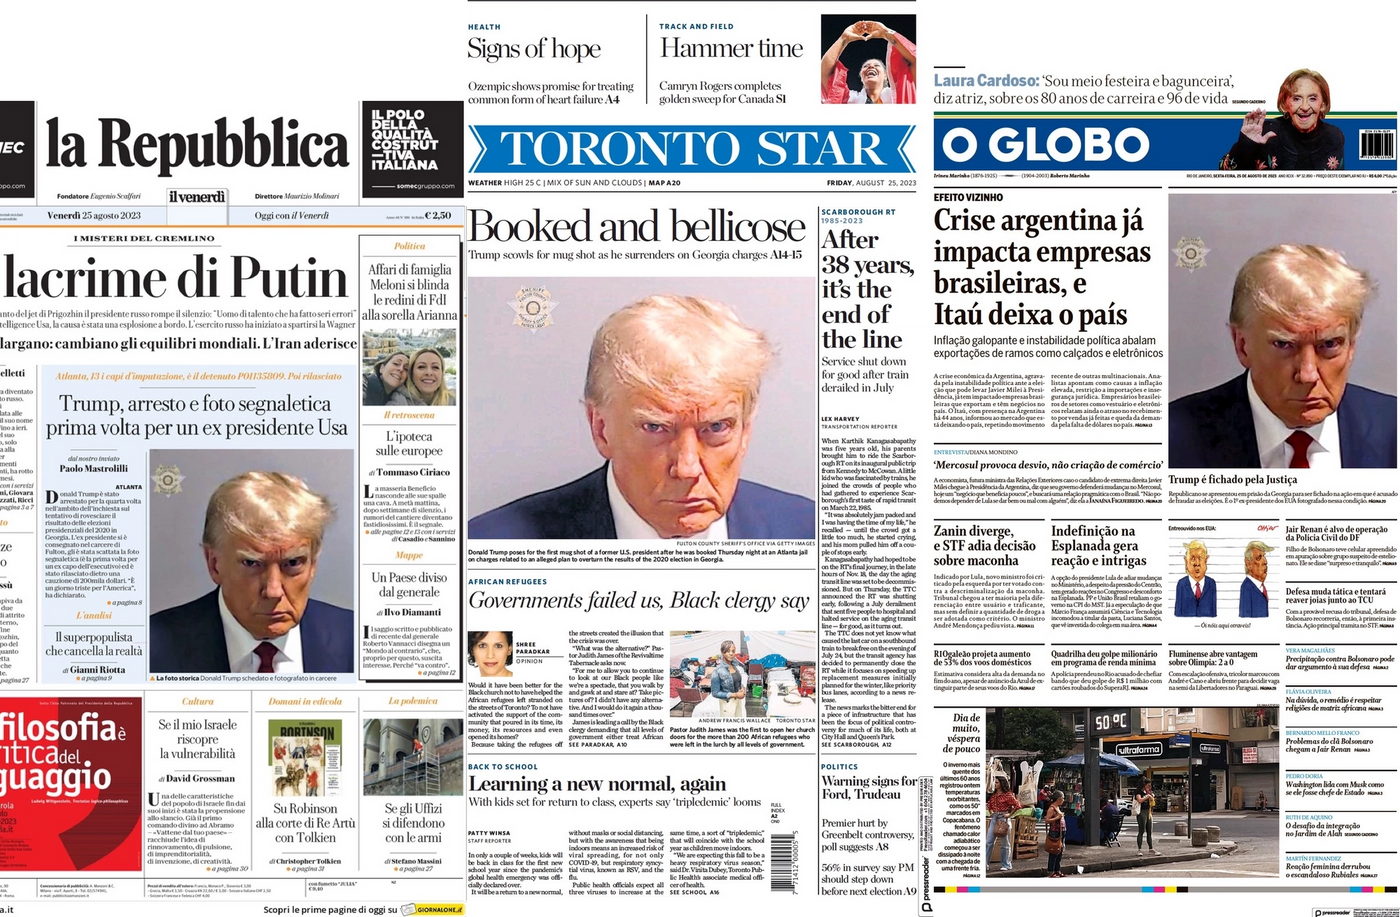 Front pages from the Toronto Star, O Globo, and la Repubblica showing Donald Trump's mug shot.